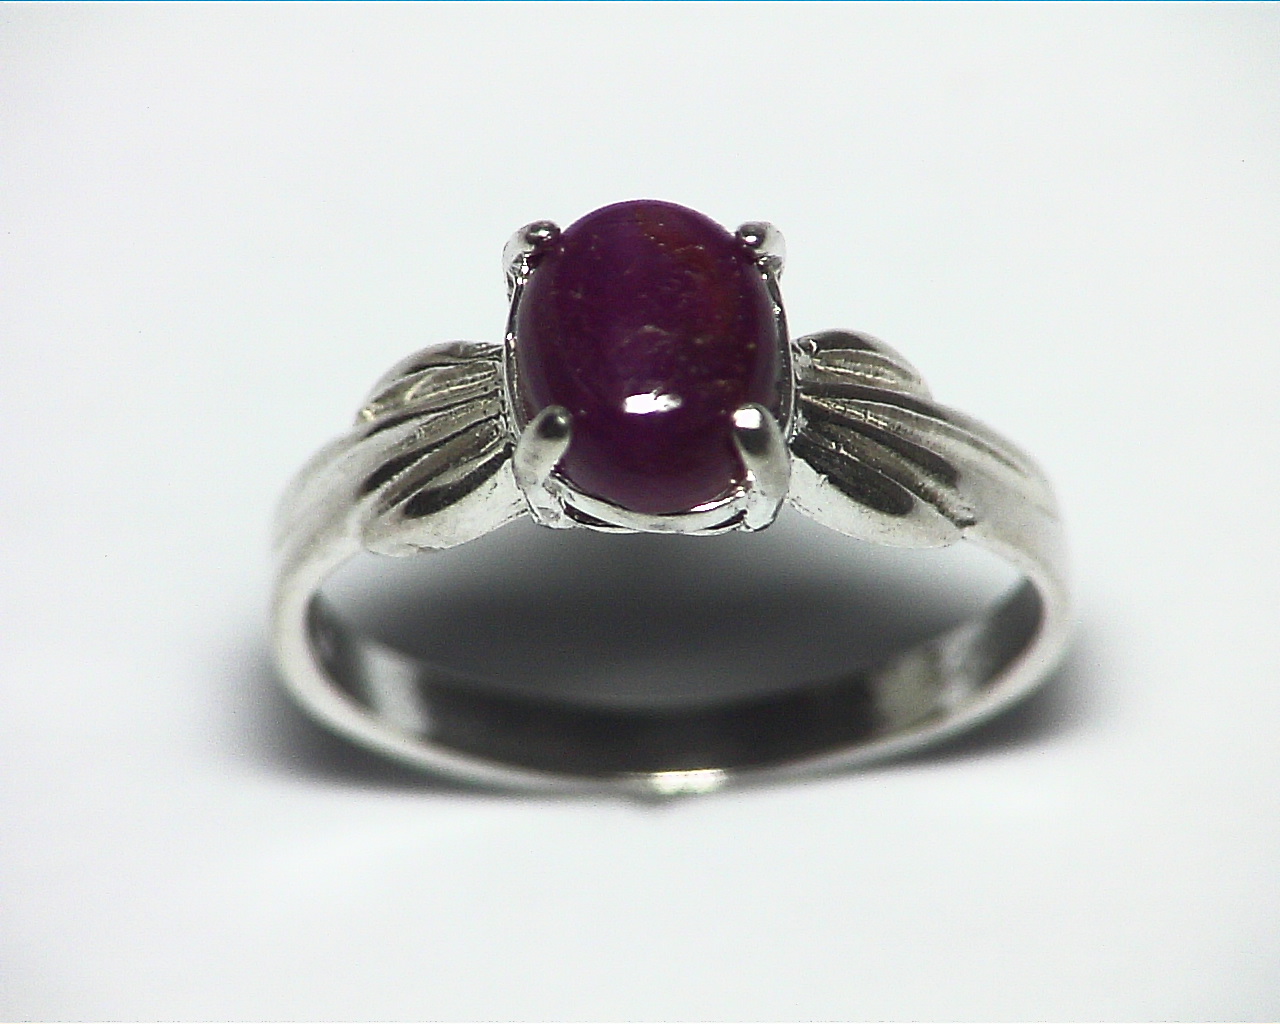 Star Ruby Cabochon Natural Genuine Gemstone Sterling Silver Ring RSS,488 1